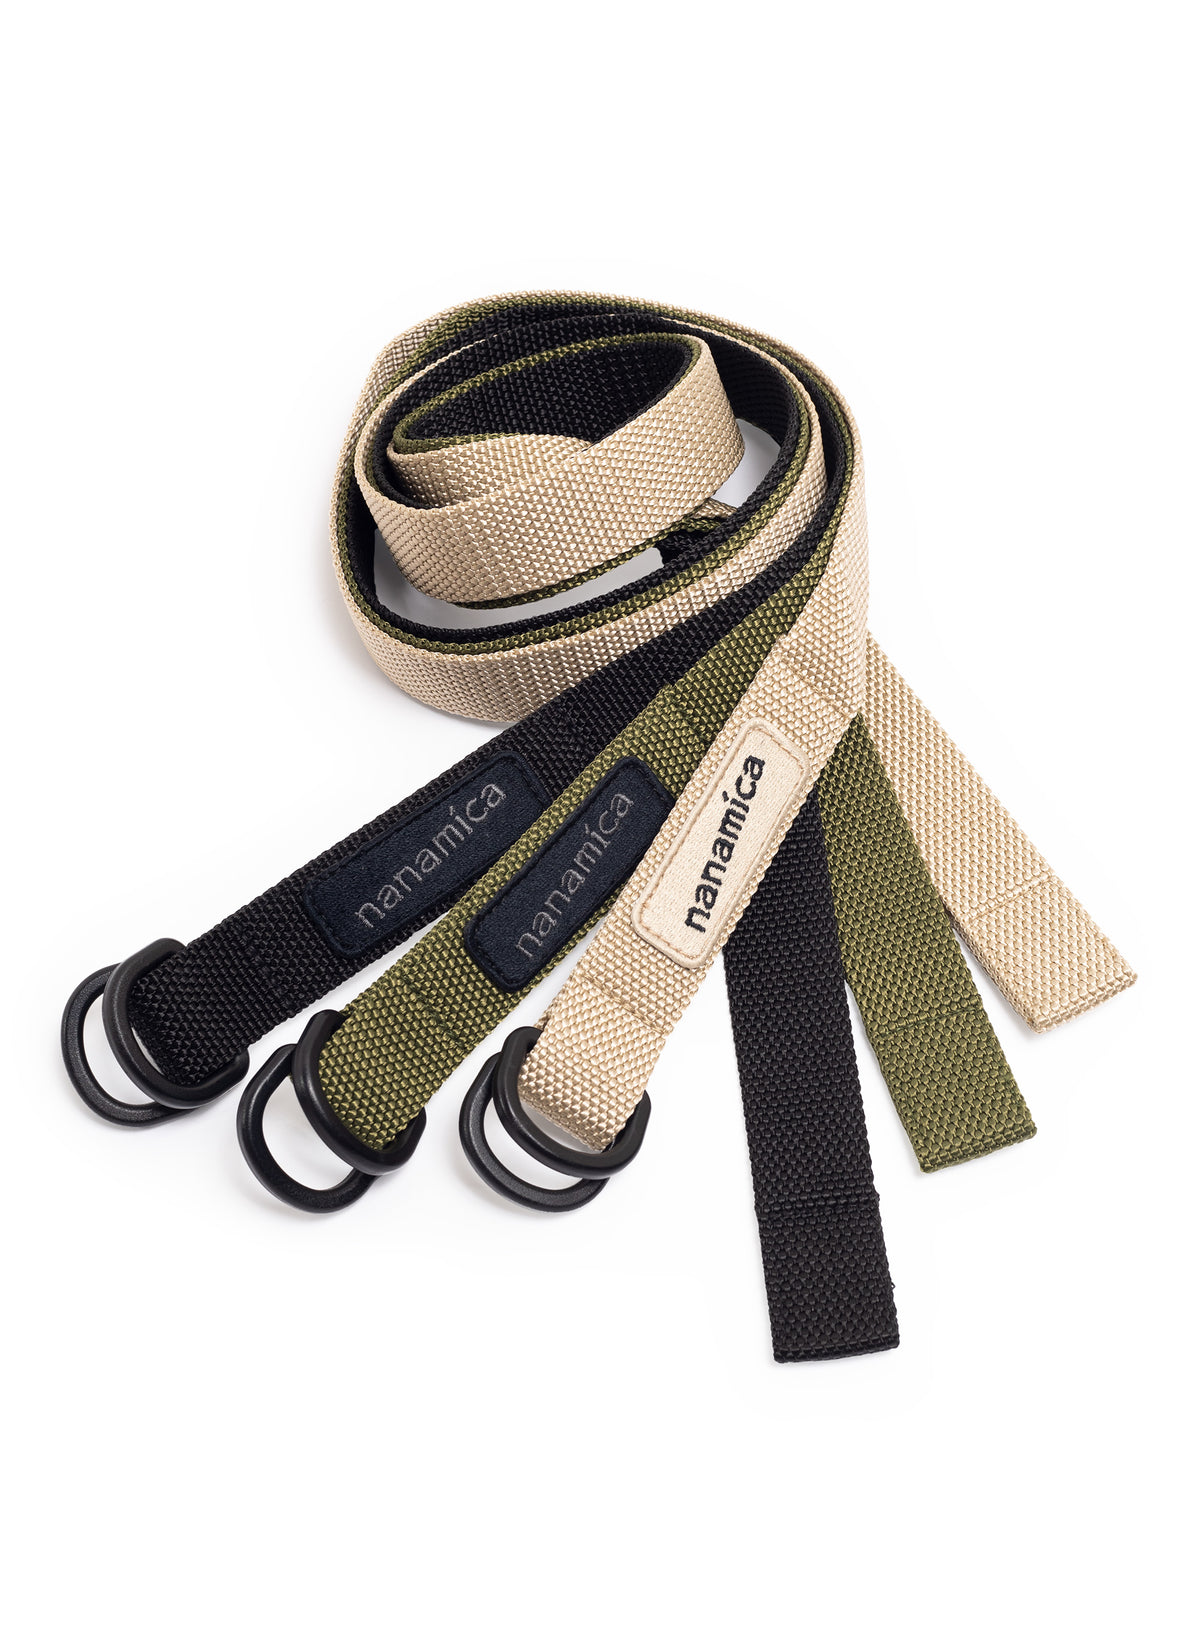 Web Belt With Plastic Buckle in Beige Color